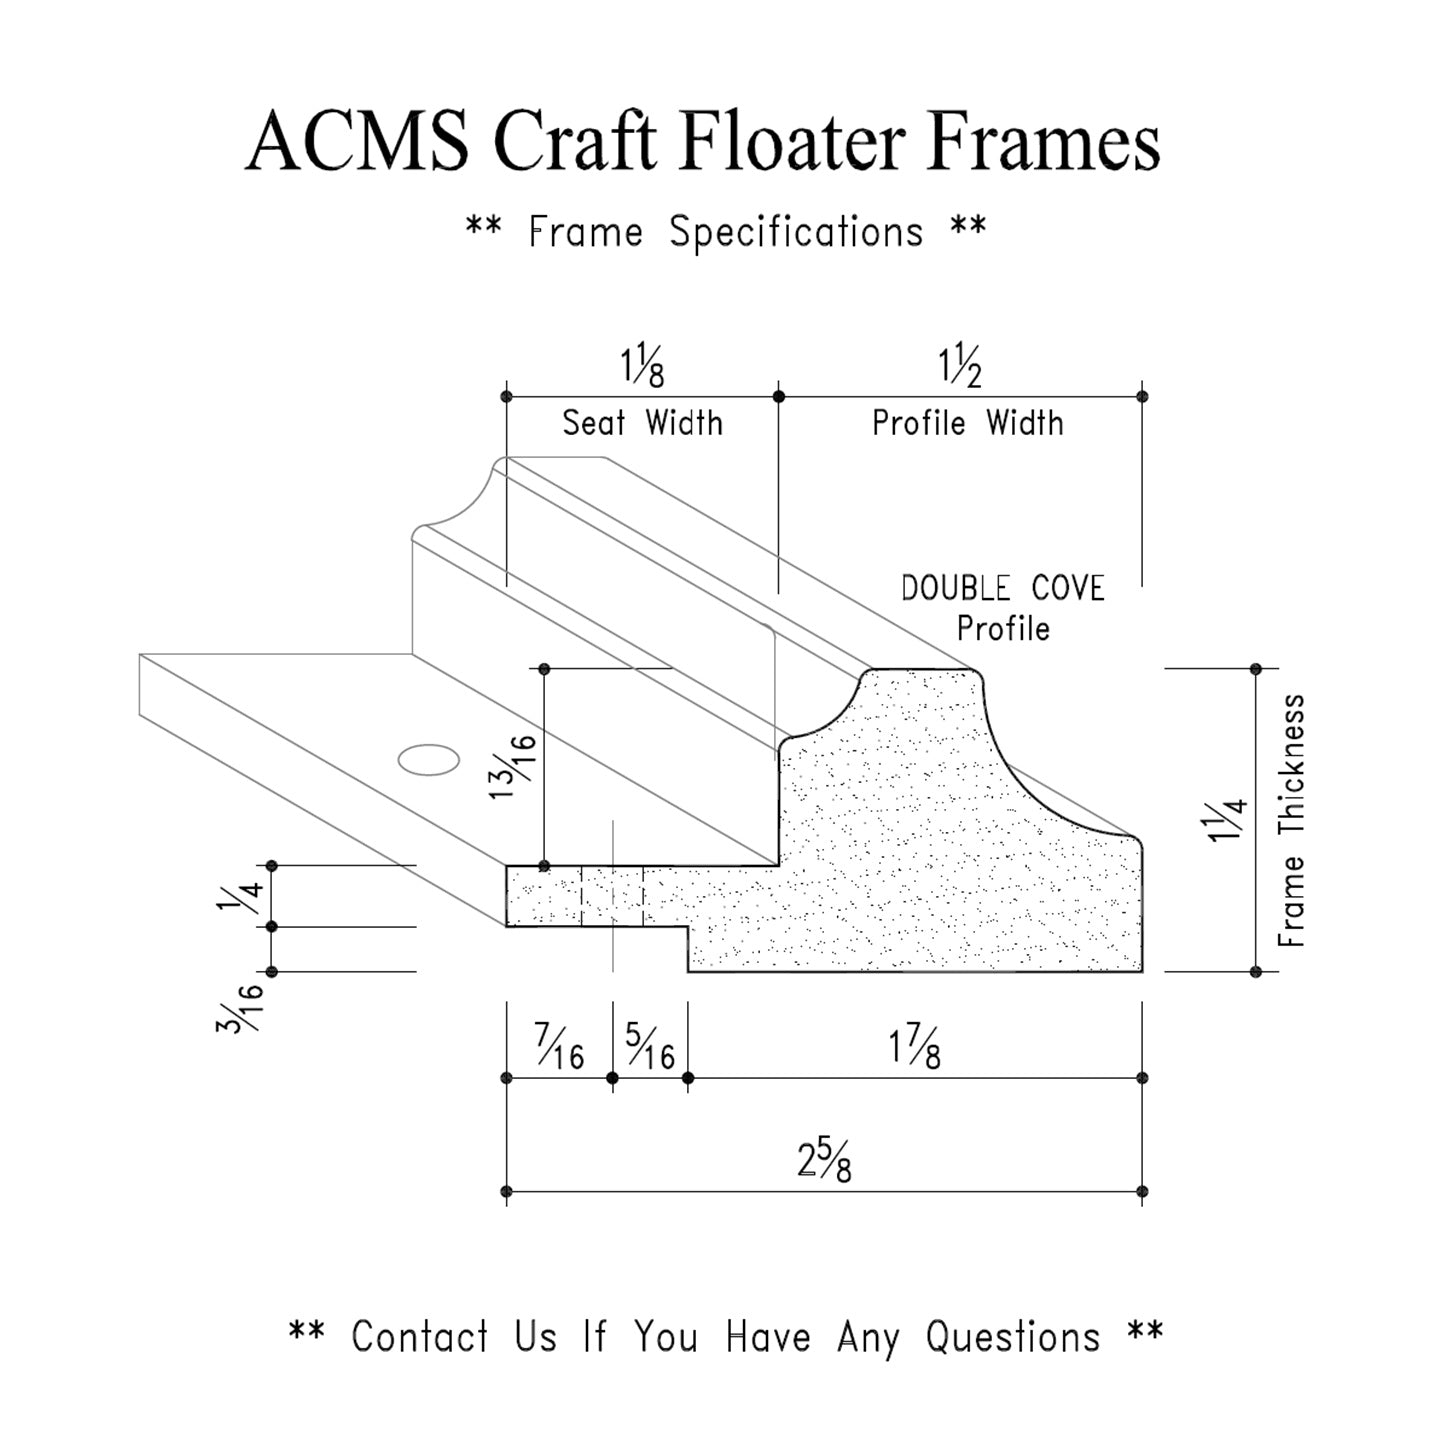 ACMS Round Craft Floater Frame - For 3/4" Thick Artwork - Profile 1 1/2" DOUBLE COVE - 1 1/4" Thick Frame